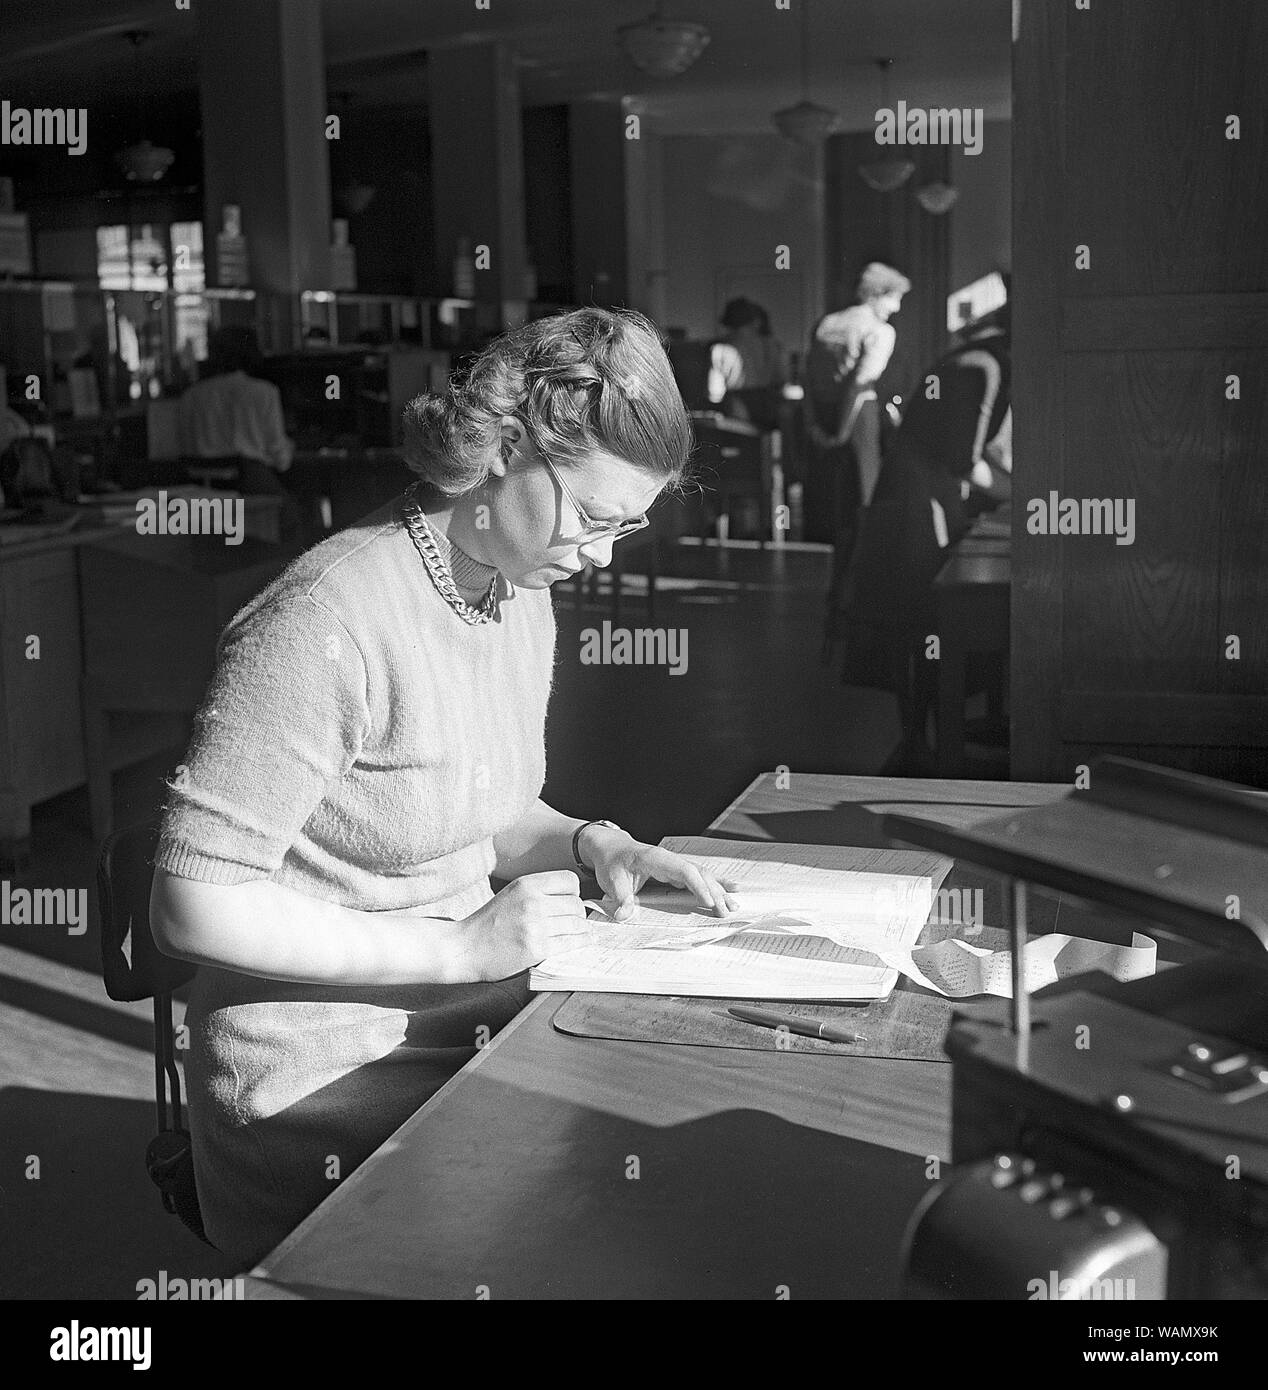 1950s office clerk.  A young woman is sitting at her desk and carefully examines the accounting and that the figures and numbers add up and is correct. Sweden 1950 Kristoffersson ref AY6-2 Stock Photo